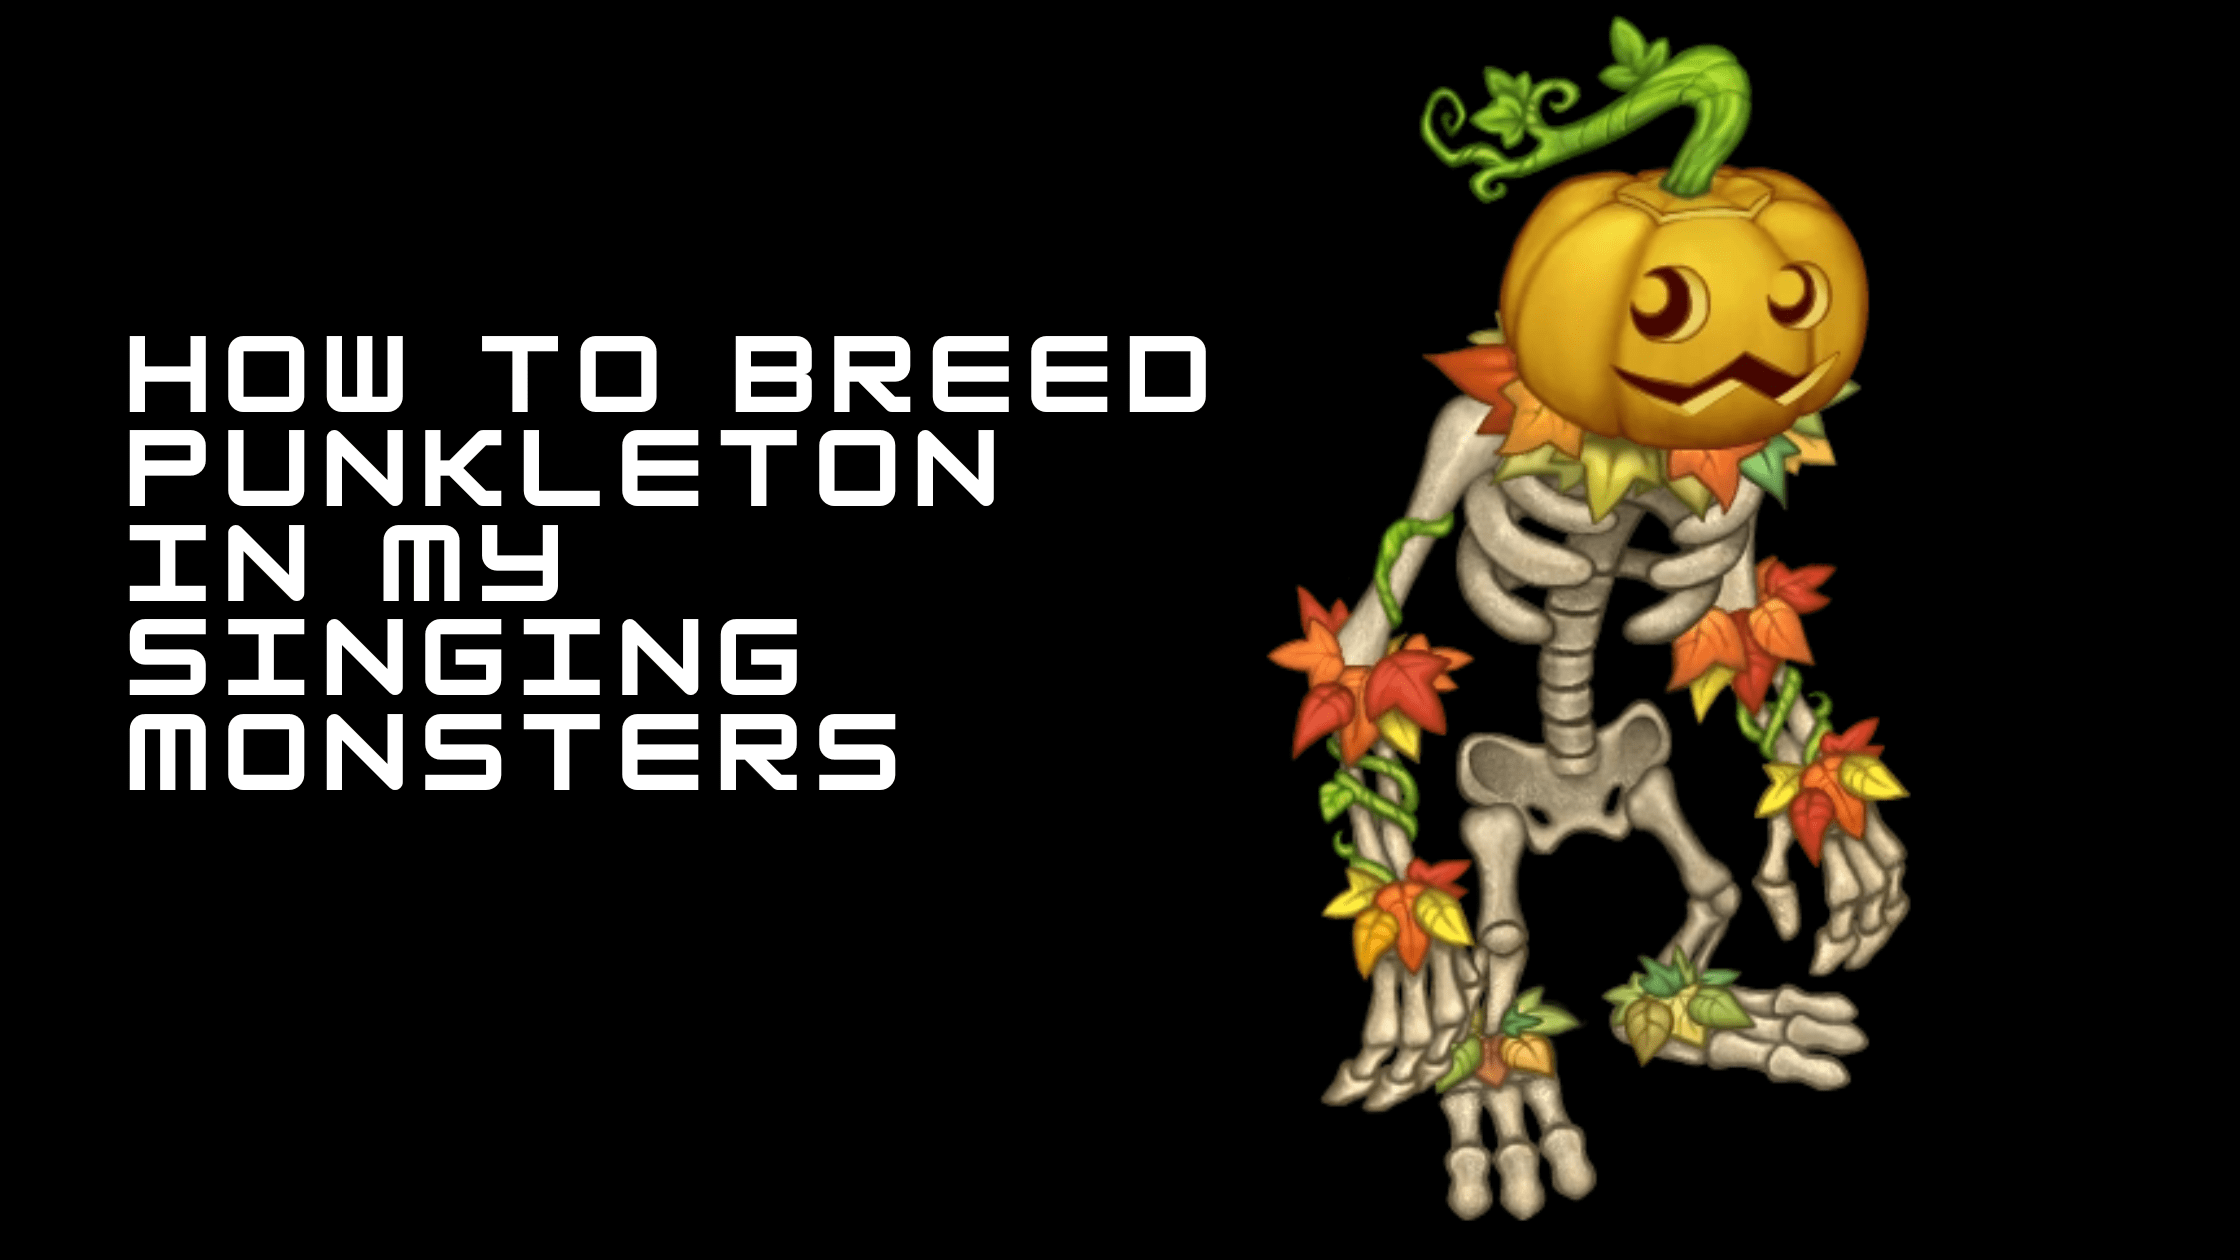 How to Breed Punkleton